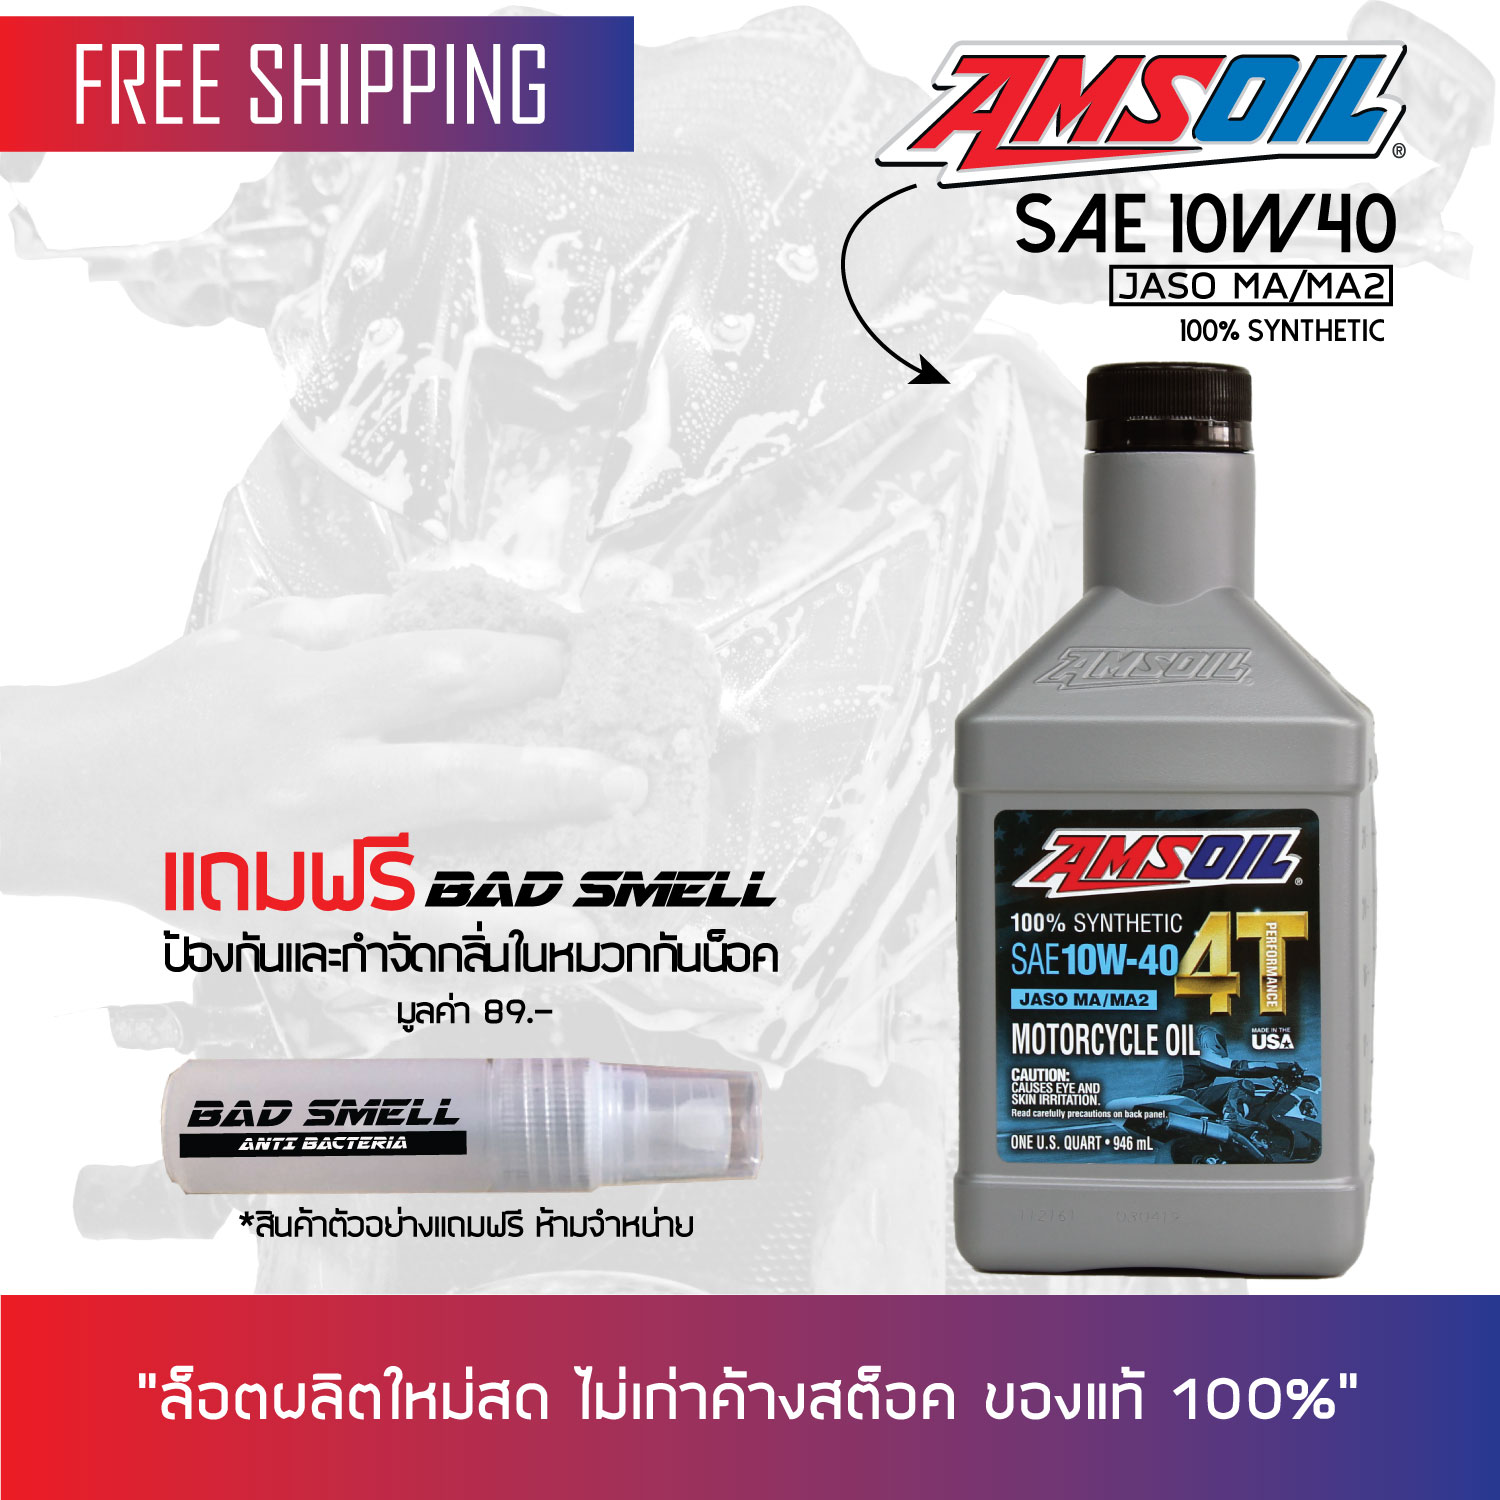 AMSOIL MC4 4T 100% Synthetic Performance Motorcycle Oil